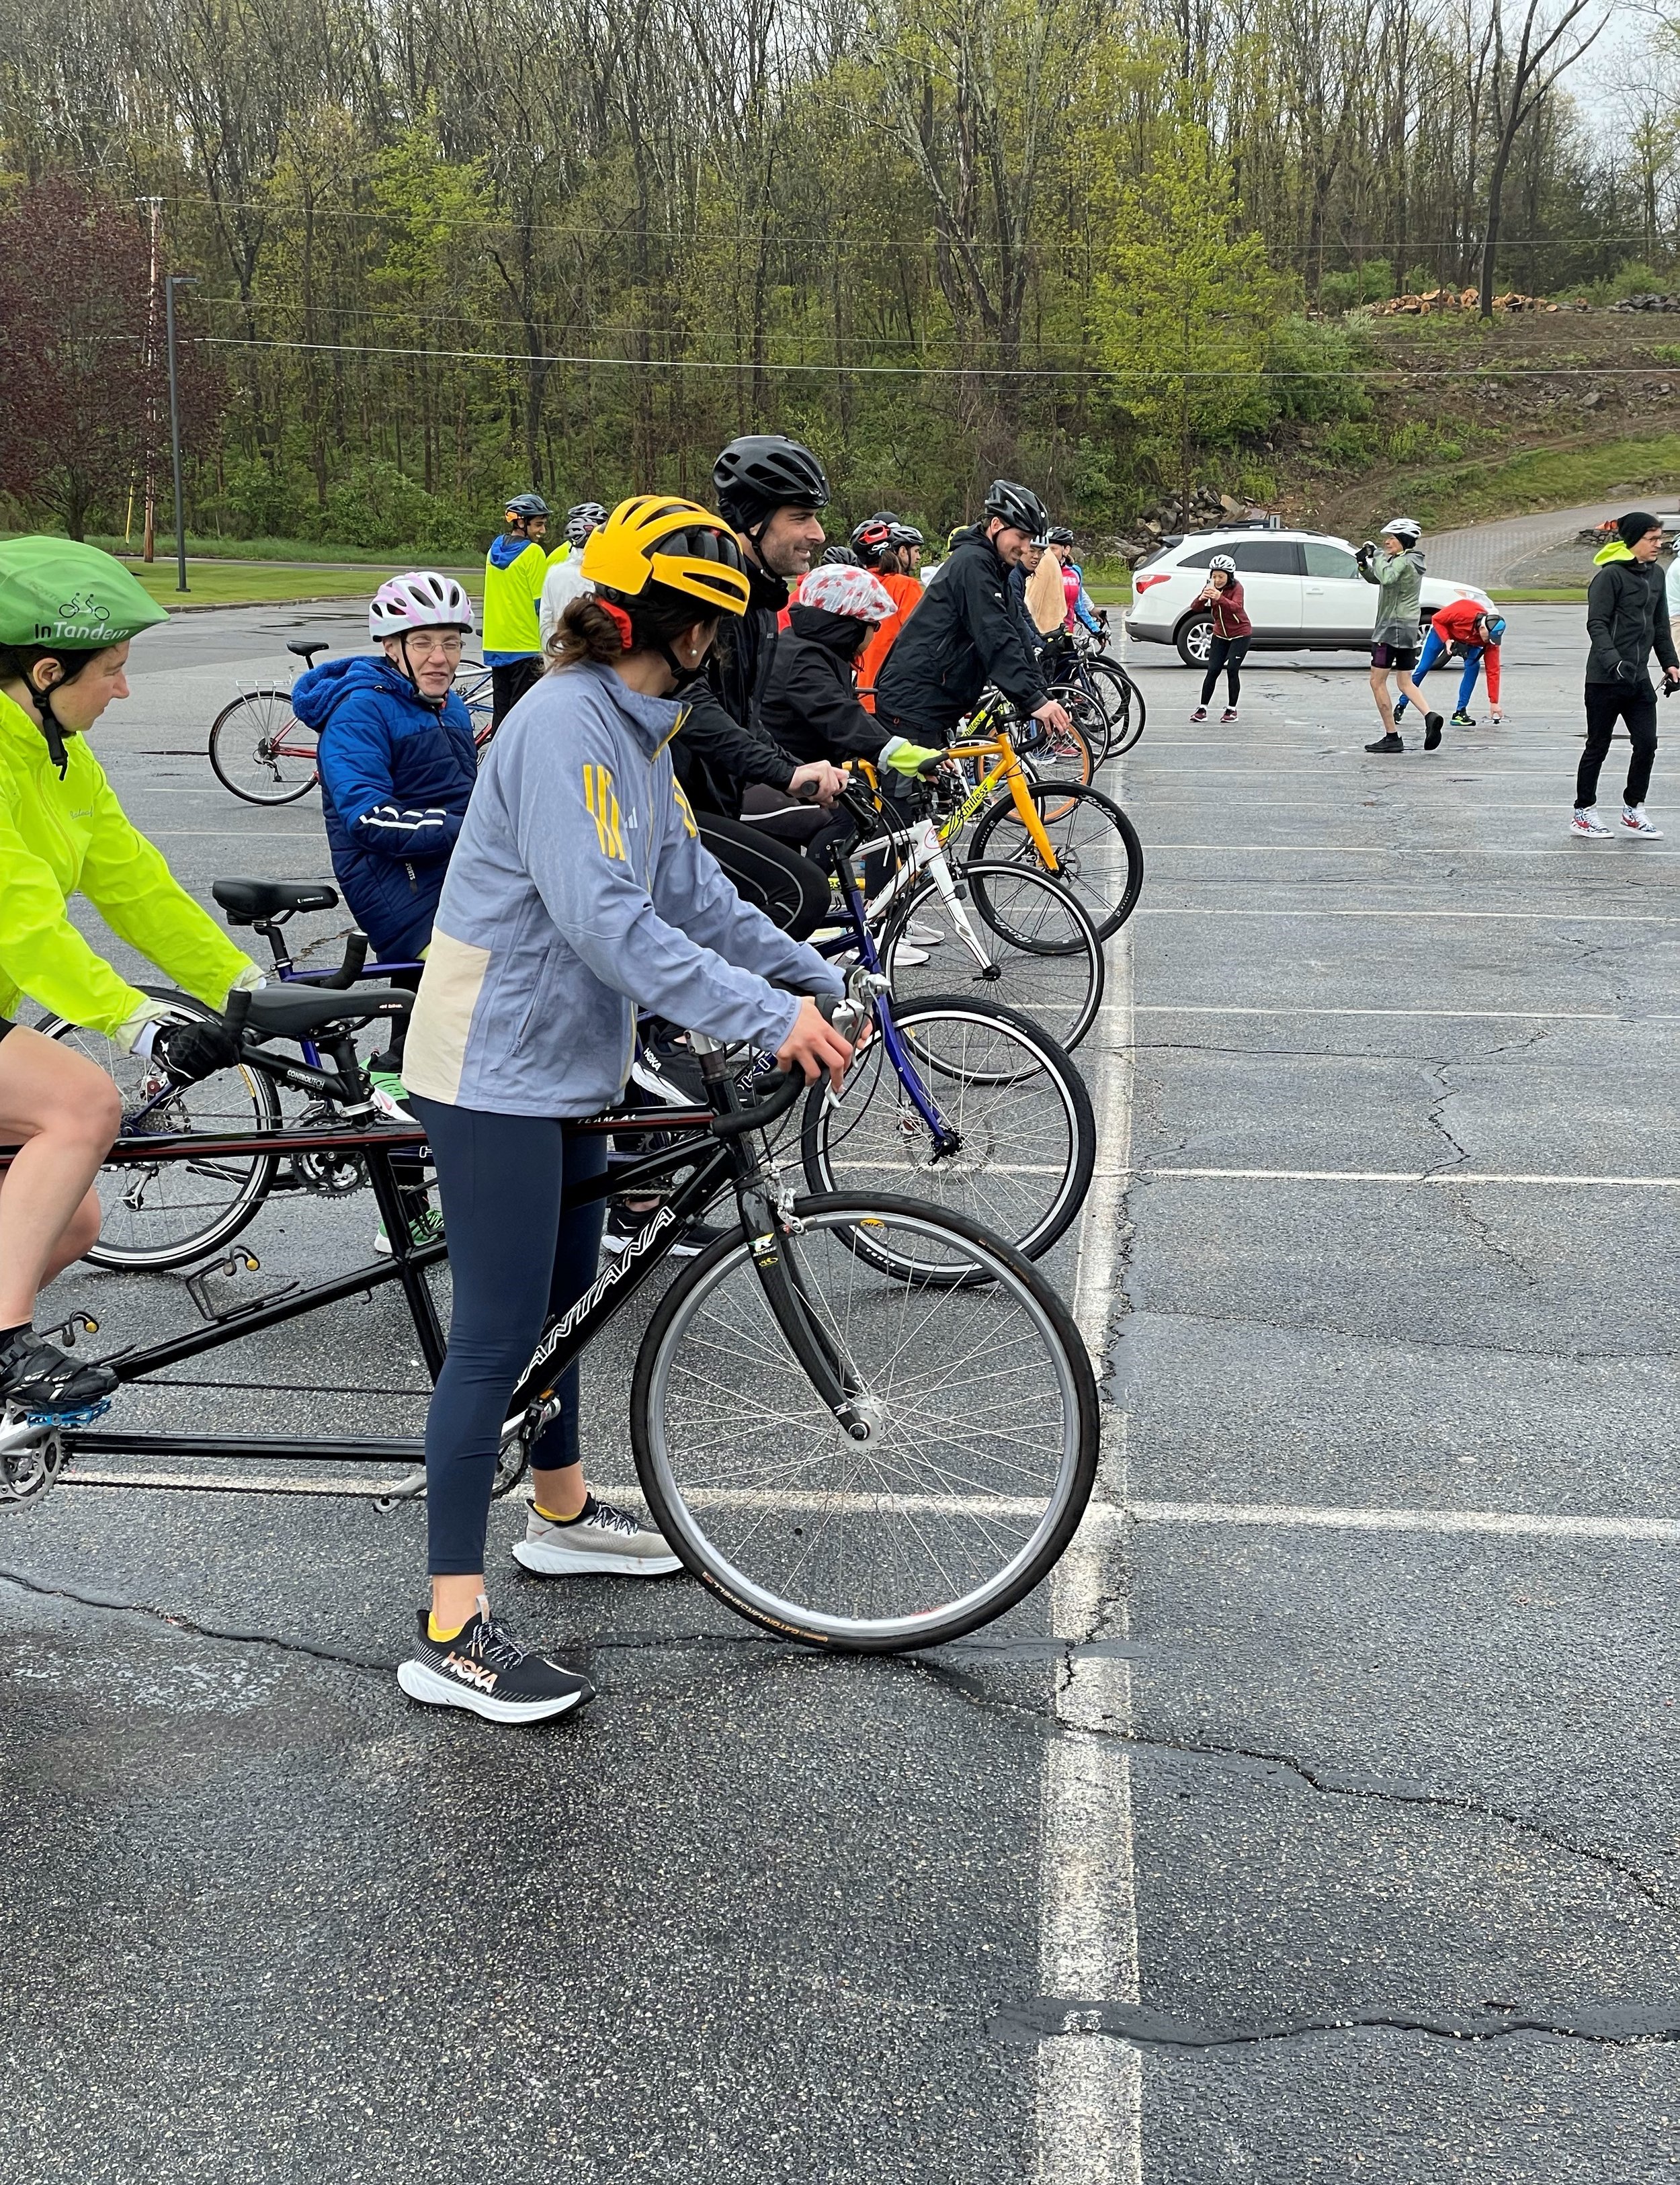  Achilles members practicing riding on tandem bicycles together  